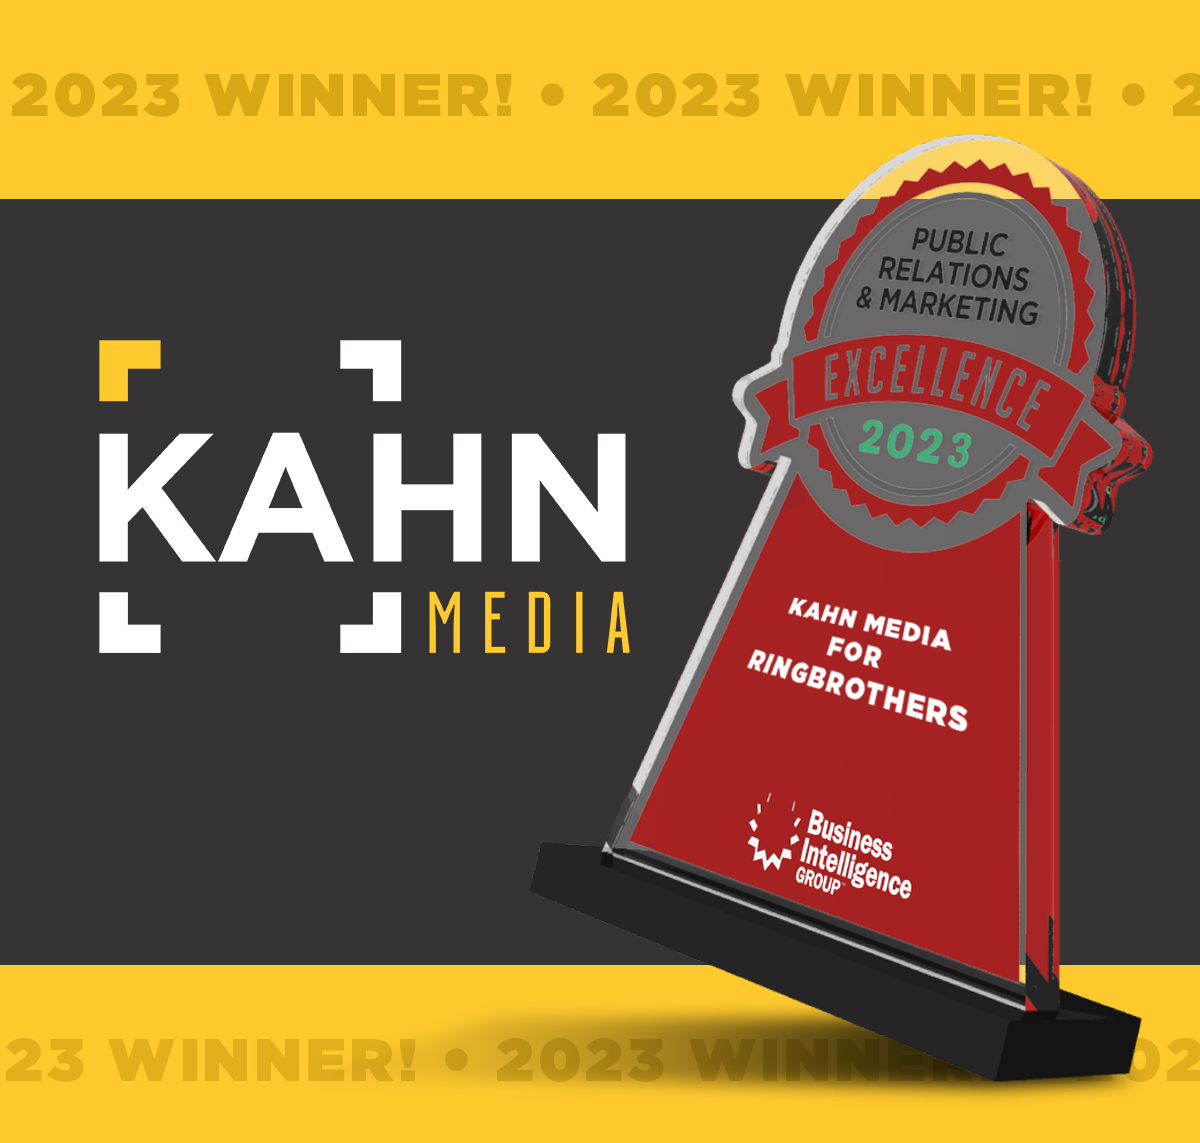 Kahn Media Wins Award for Ringbrothers Marketing Campaign | THE SHOP